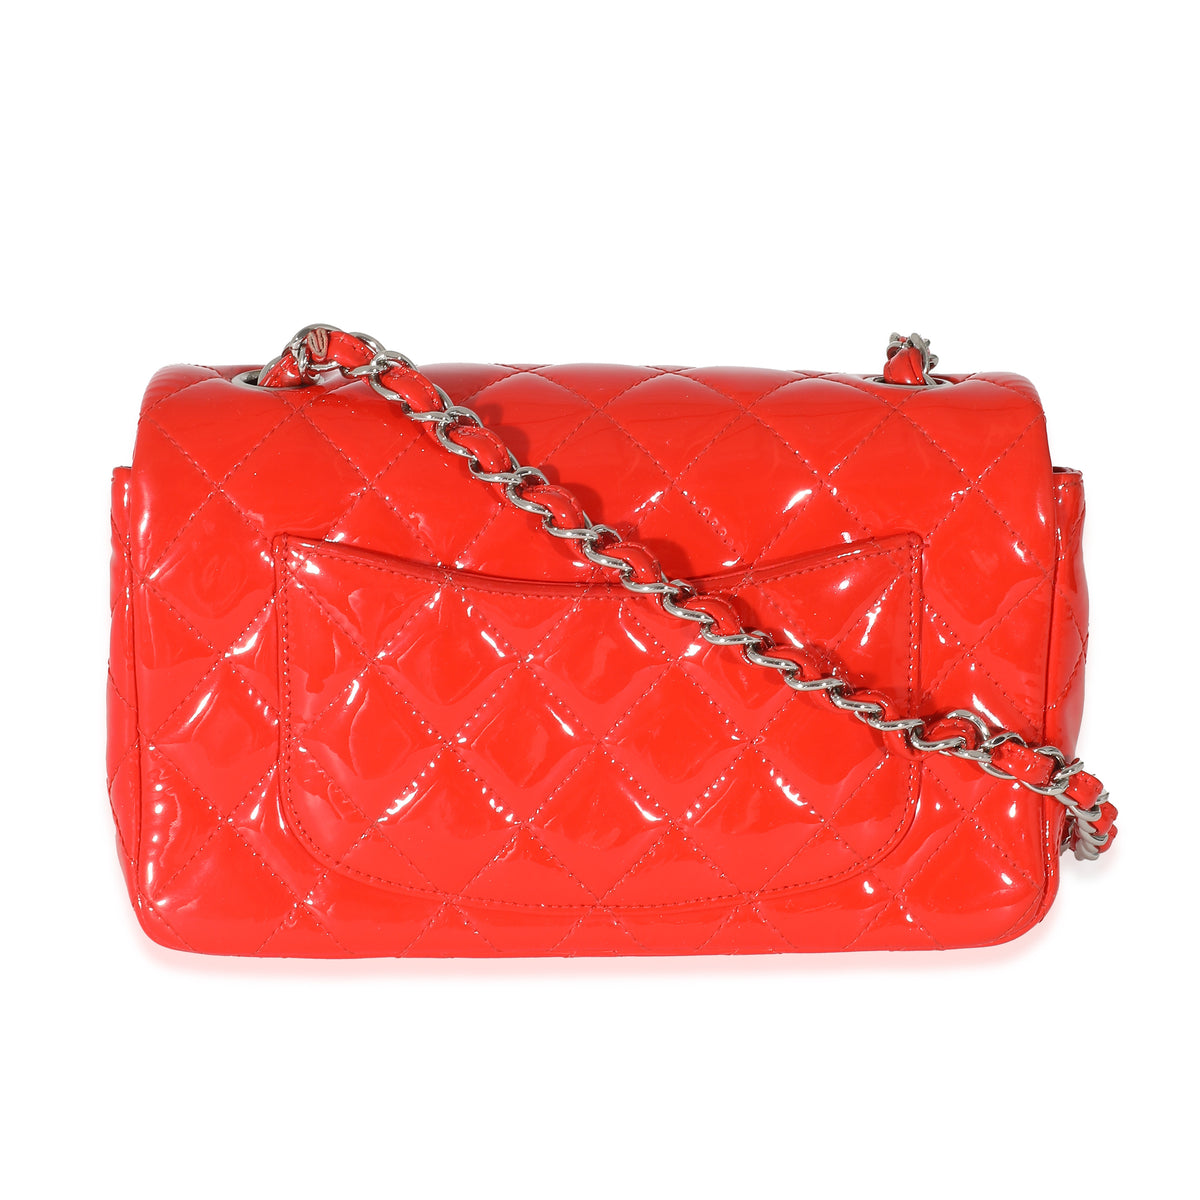 Chanel Red Quilted Patent Mini Rectangular Flap Bag